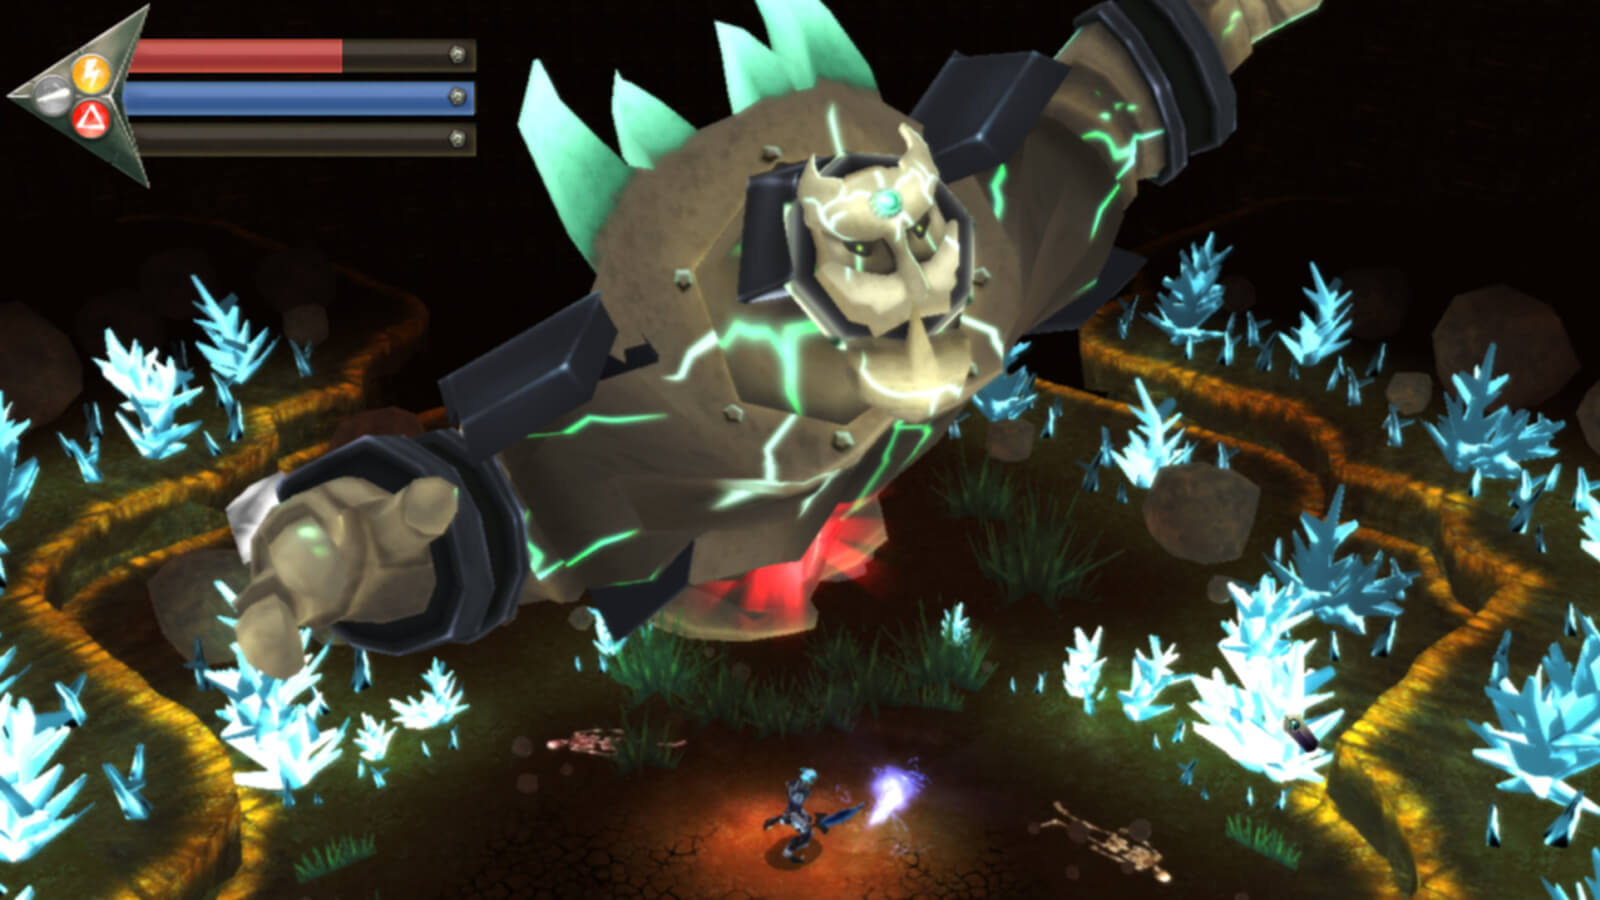 A large, masked metal boss erupts from the ground covered in green crystals and lightning streaks